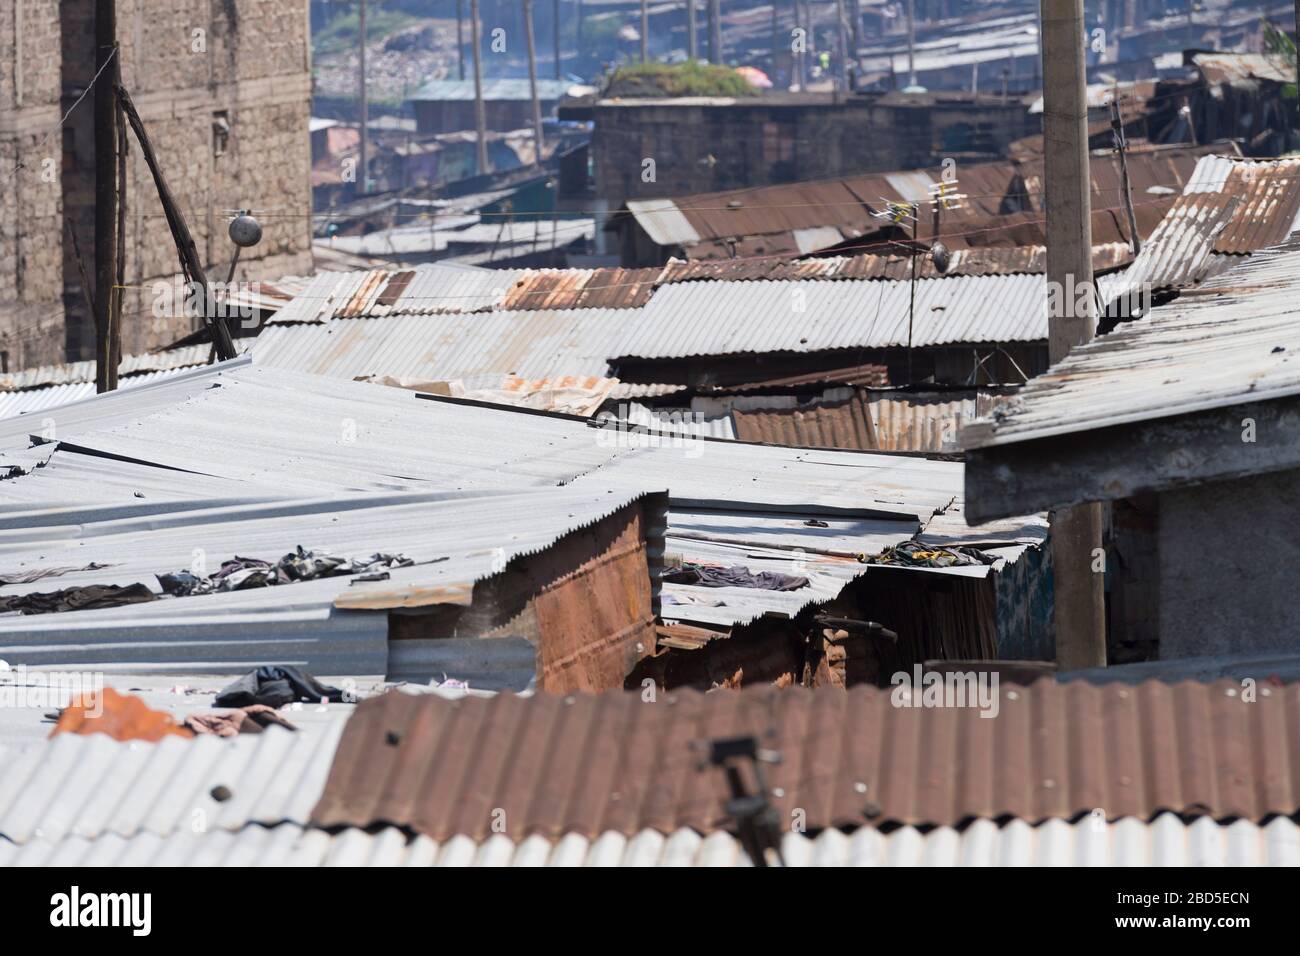 A view across corrugated iron rooftops of Mathare, Nairobi, Kenya.  Mathare is a collection of slums in North East of central Nairobi, Kenya with a po Stock Photo